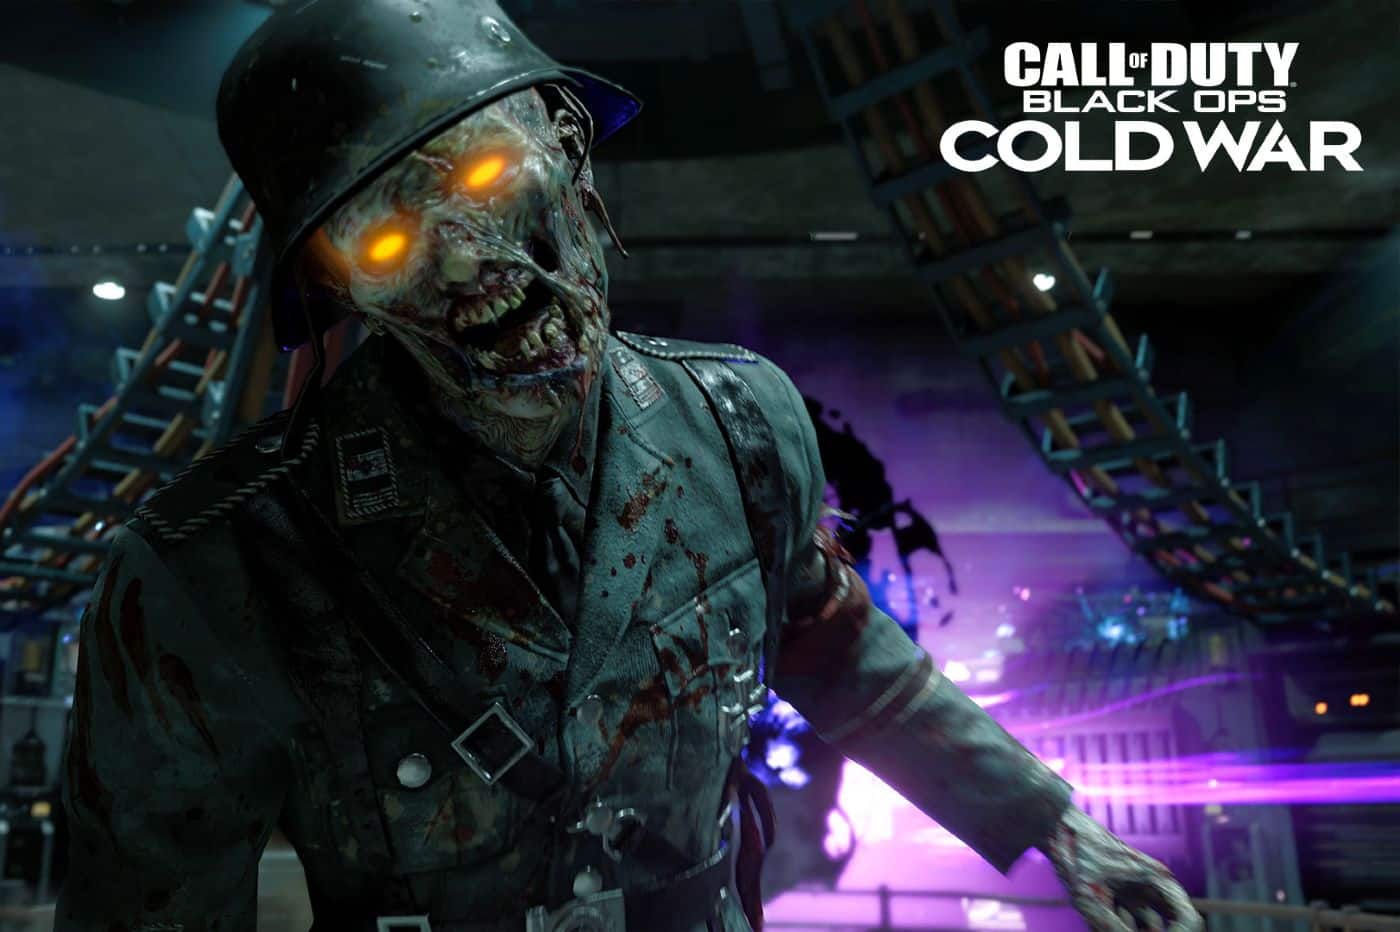 Call of Duty: Cold War - Call of Duty Black Ops